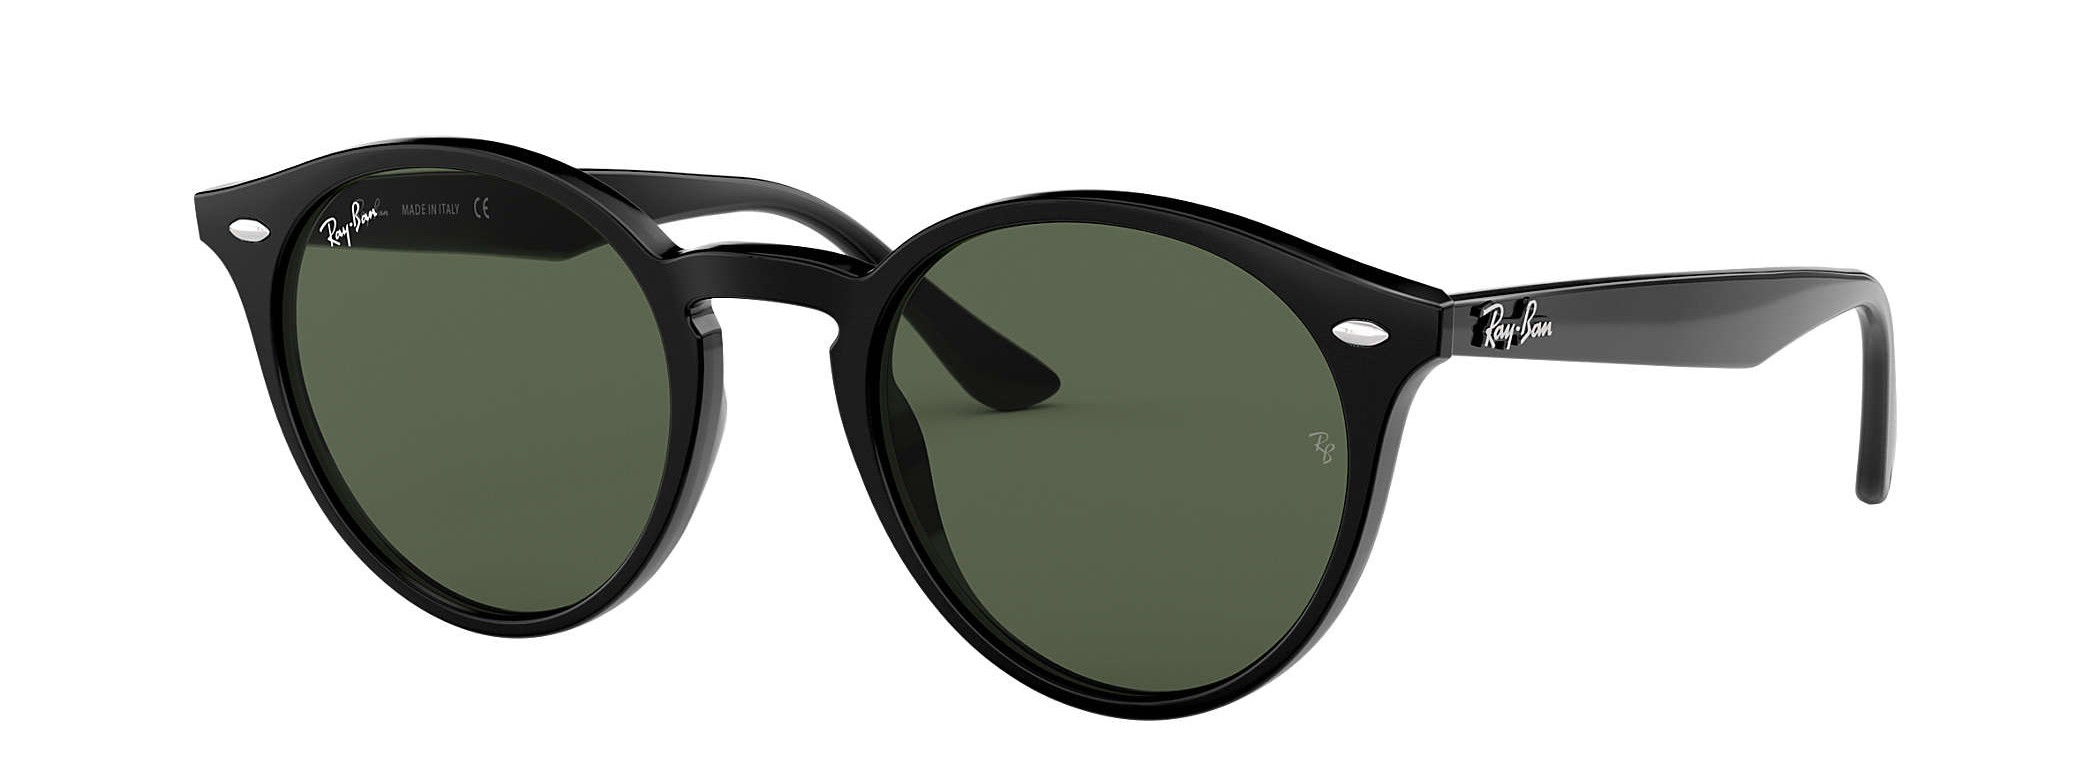 ray-ban rb2180 round sunglasses in black with green lenses